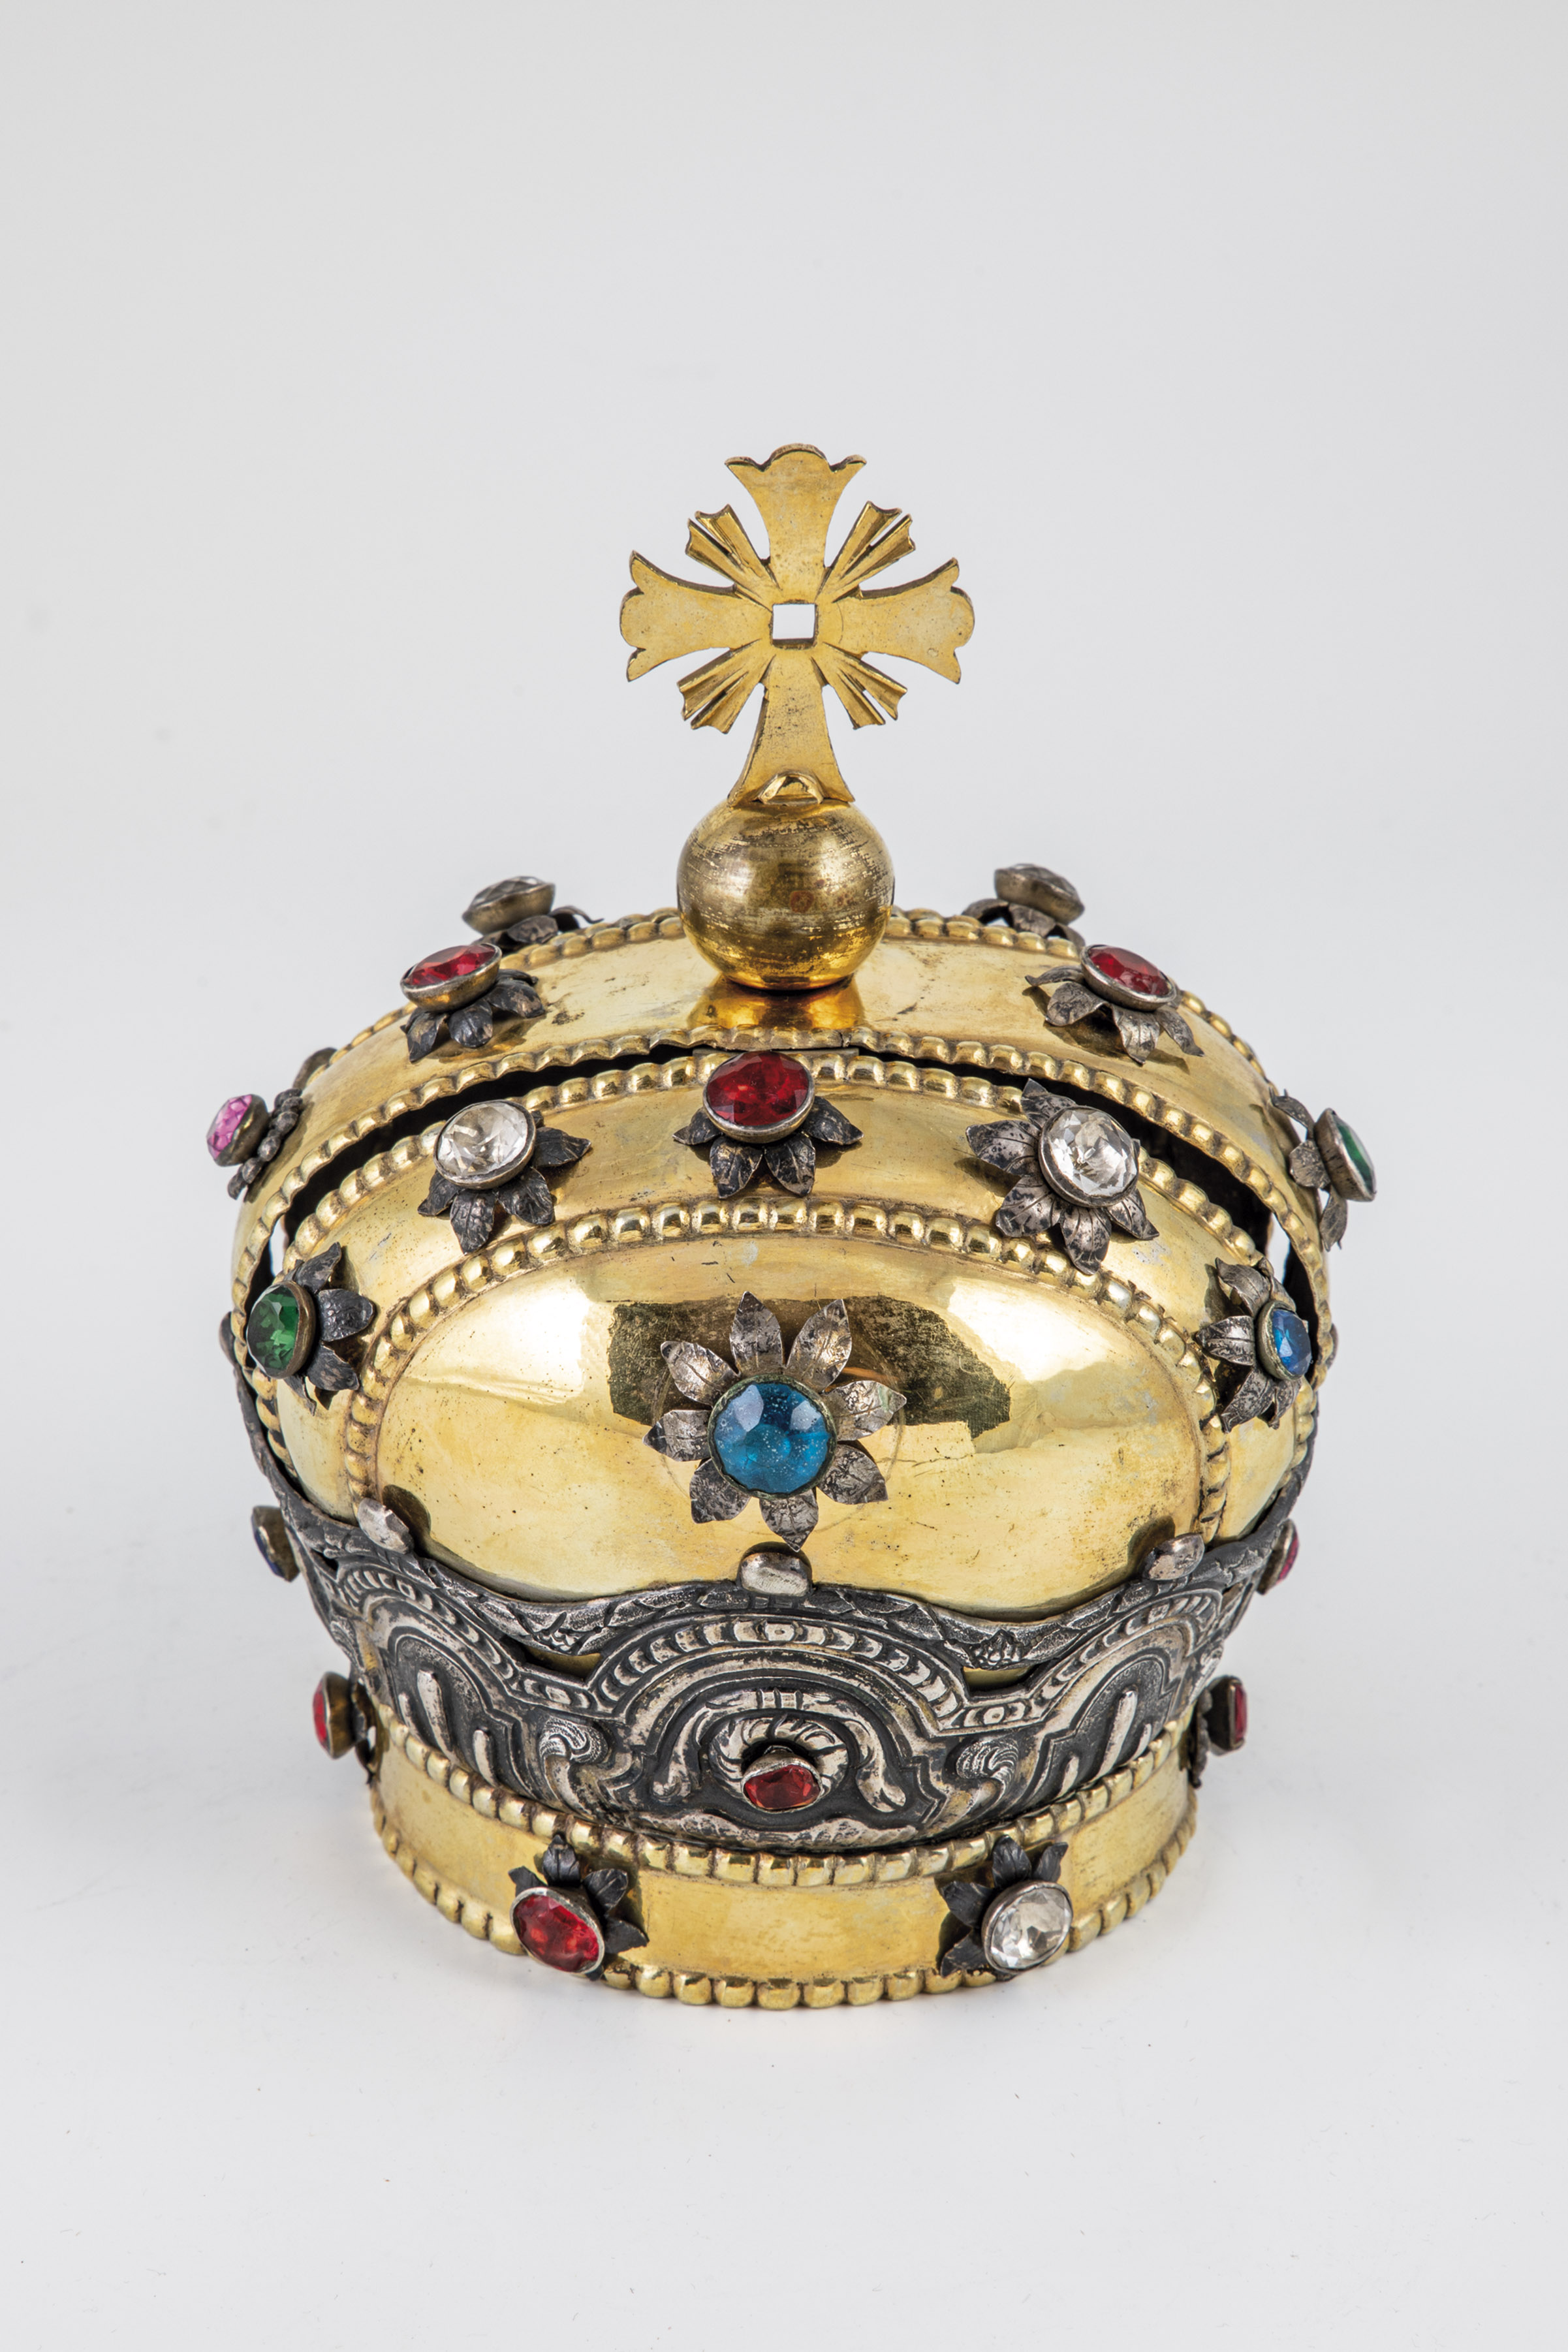 Crown for the tsar's court